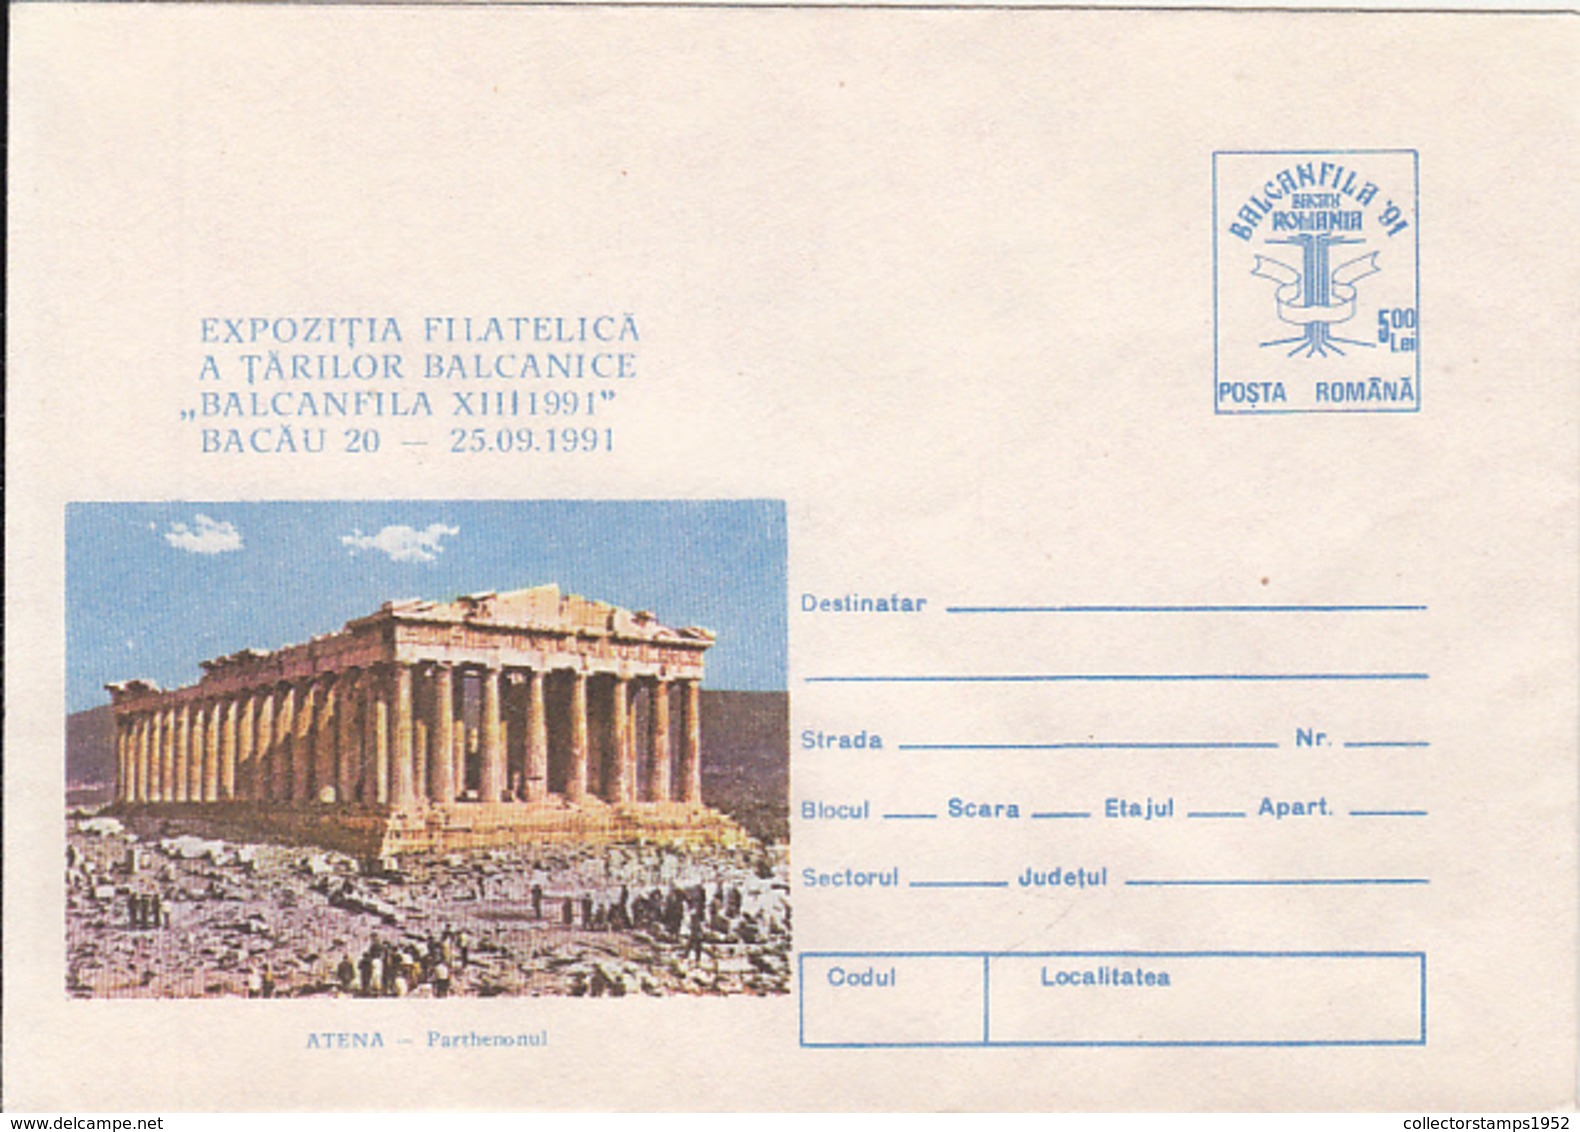 77848- ATHENS PARTHENON, ANCIENT TOWN RUINS, ARCHAEOLOGY, COVER STATIONERY, 1991, ROMANIA - Archéologie